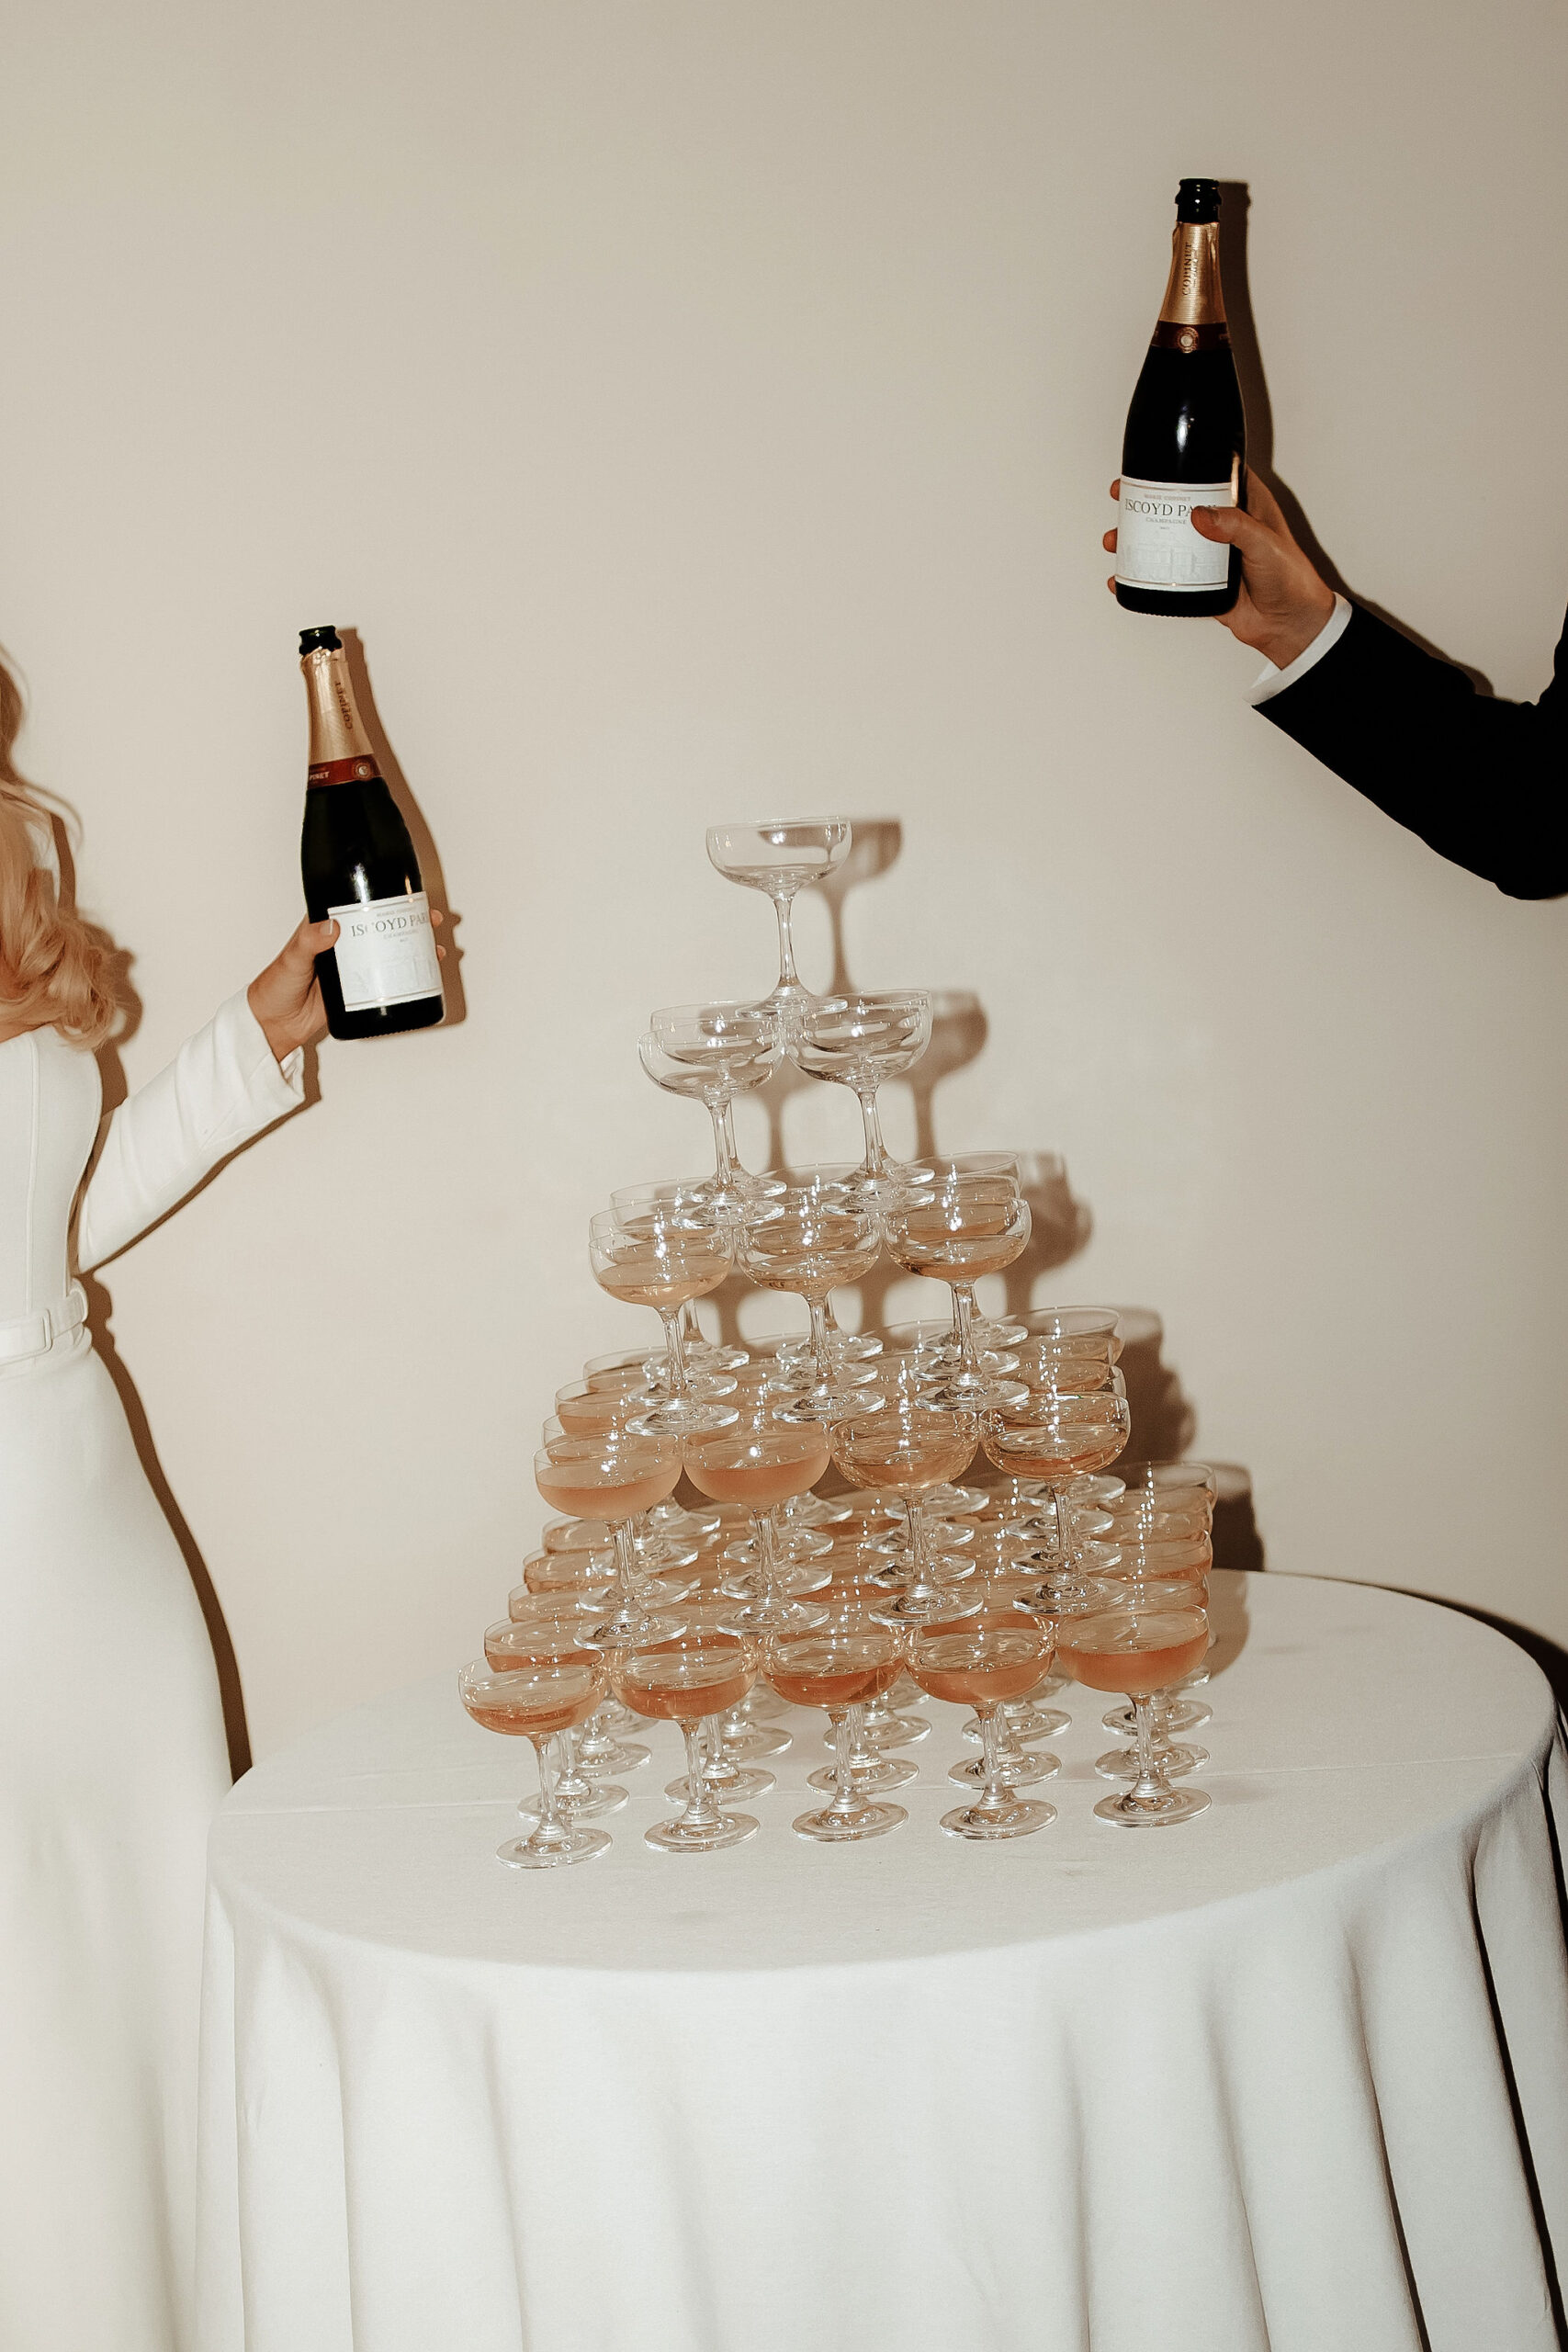 Your complete guide on how to build the best wedding champagne tower for your big day including flower ice cubes inspiration at Iscoyd Park